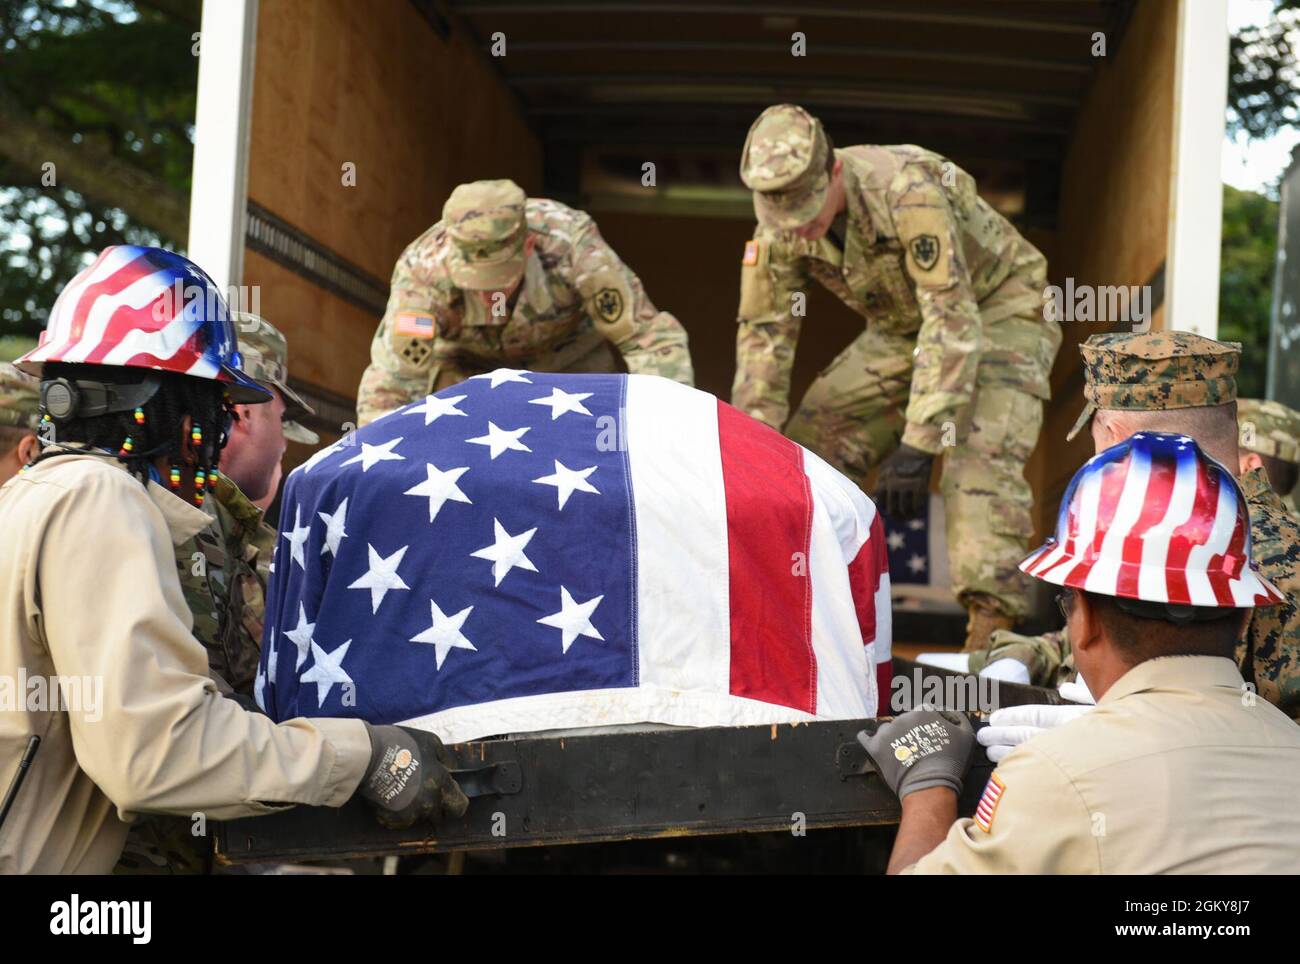 Members of the Defense POW/MIA Accounting Agency (DPAA), helped by members of the National Memorial Cemetery of the Pacific disinterment team, lift a casket during a disinterment ceremony at the NMCP (Punchbowl) in Honolulu, Hawaii, July 26, 2021. The ceremony was part of the agency’s efforts to disinter and identify the remains of unknown service members lost during the Korean War. DPAA’s mission is to achieve the fullest possible accounting for missing and unaccounted-for U.S. personnel to their families and our nation Stock Photo